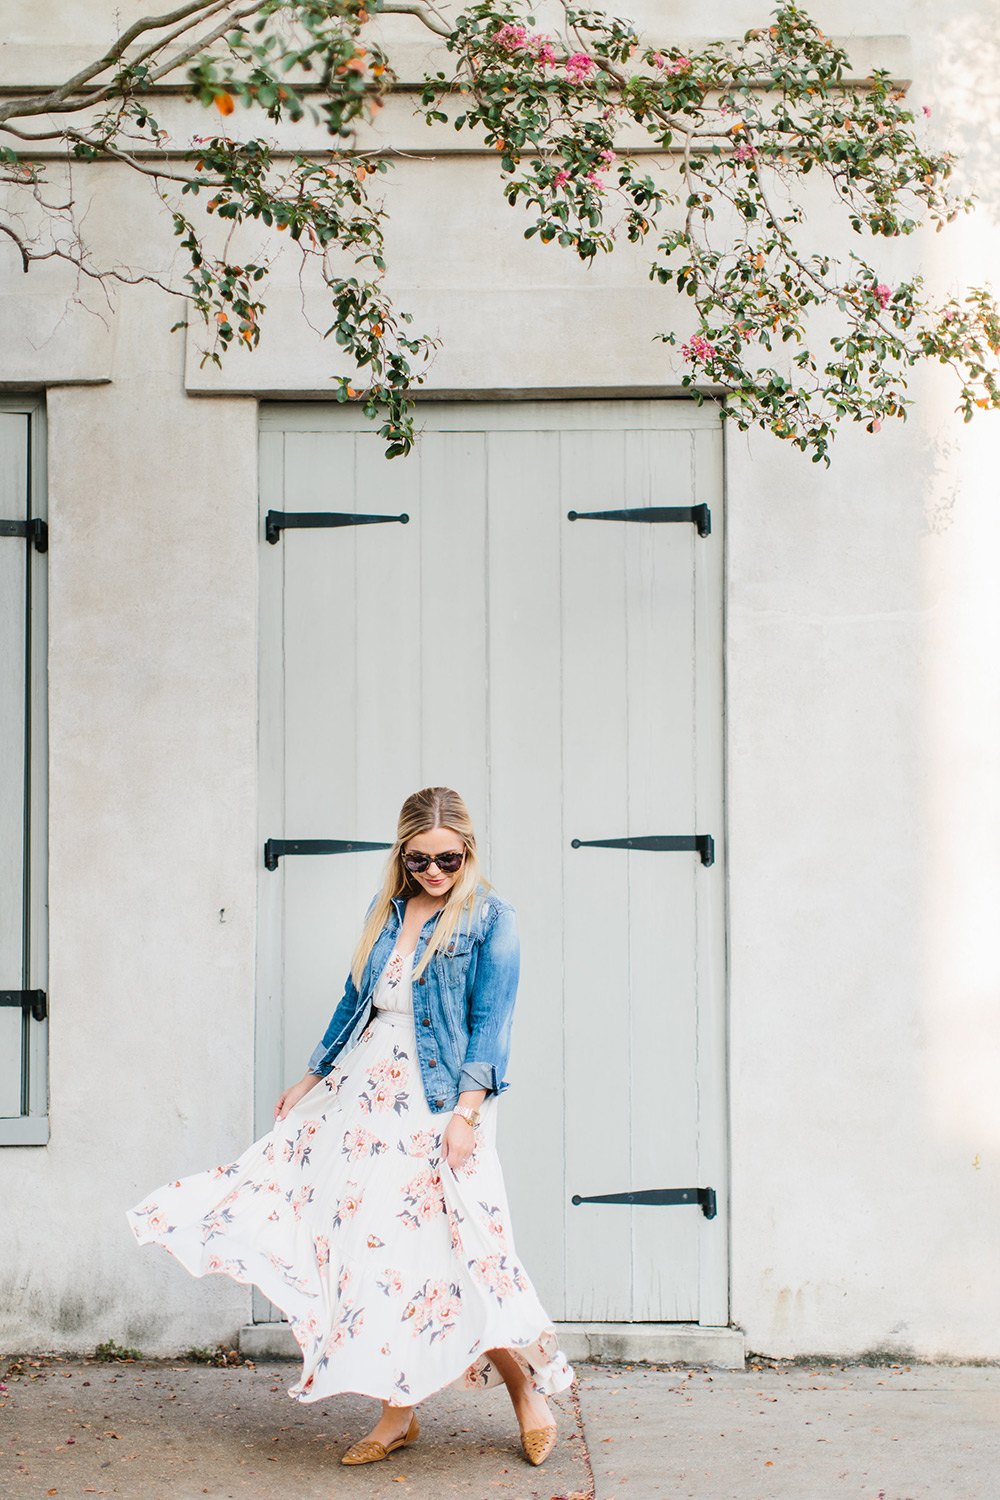 Summer Dress Transitioned to Fall with Denim Jacket